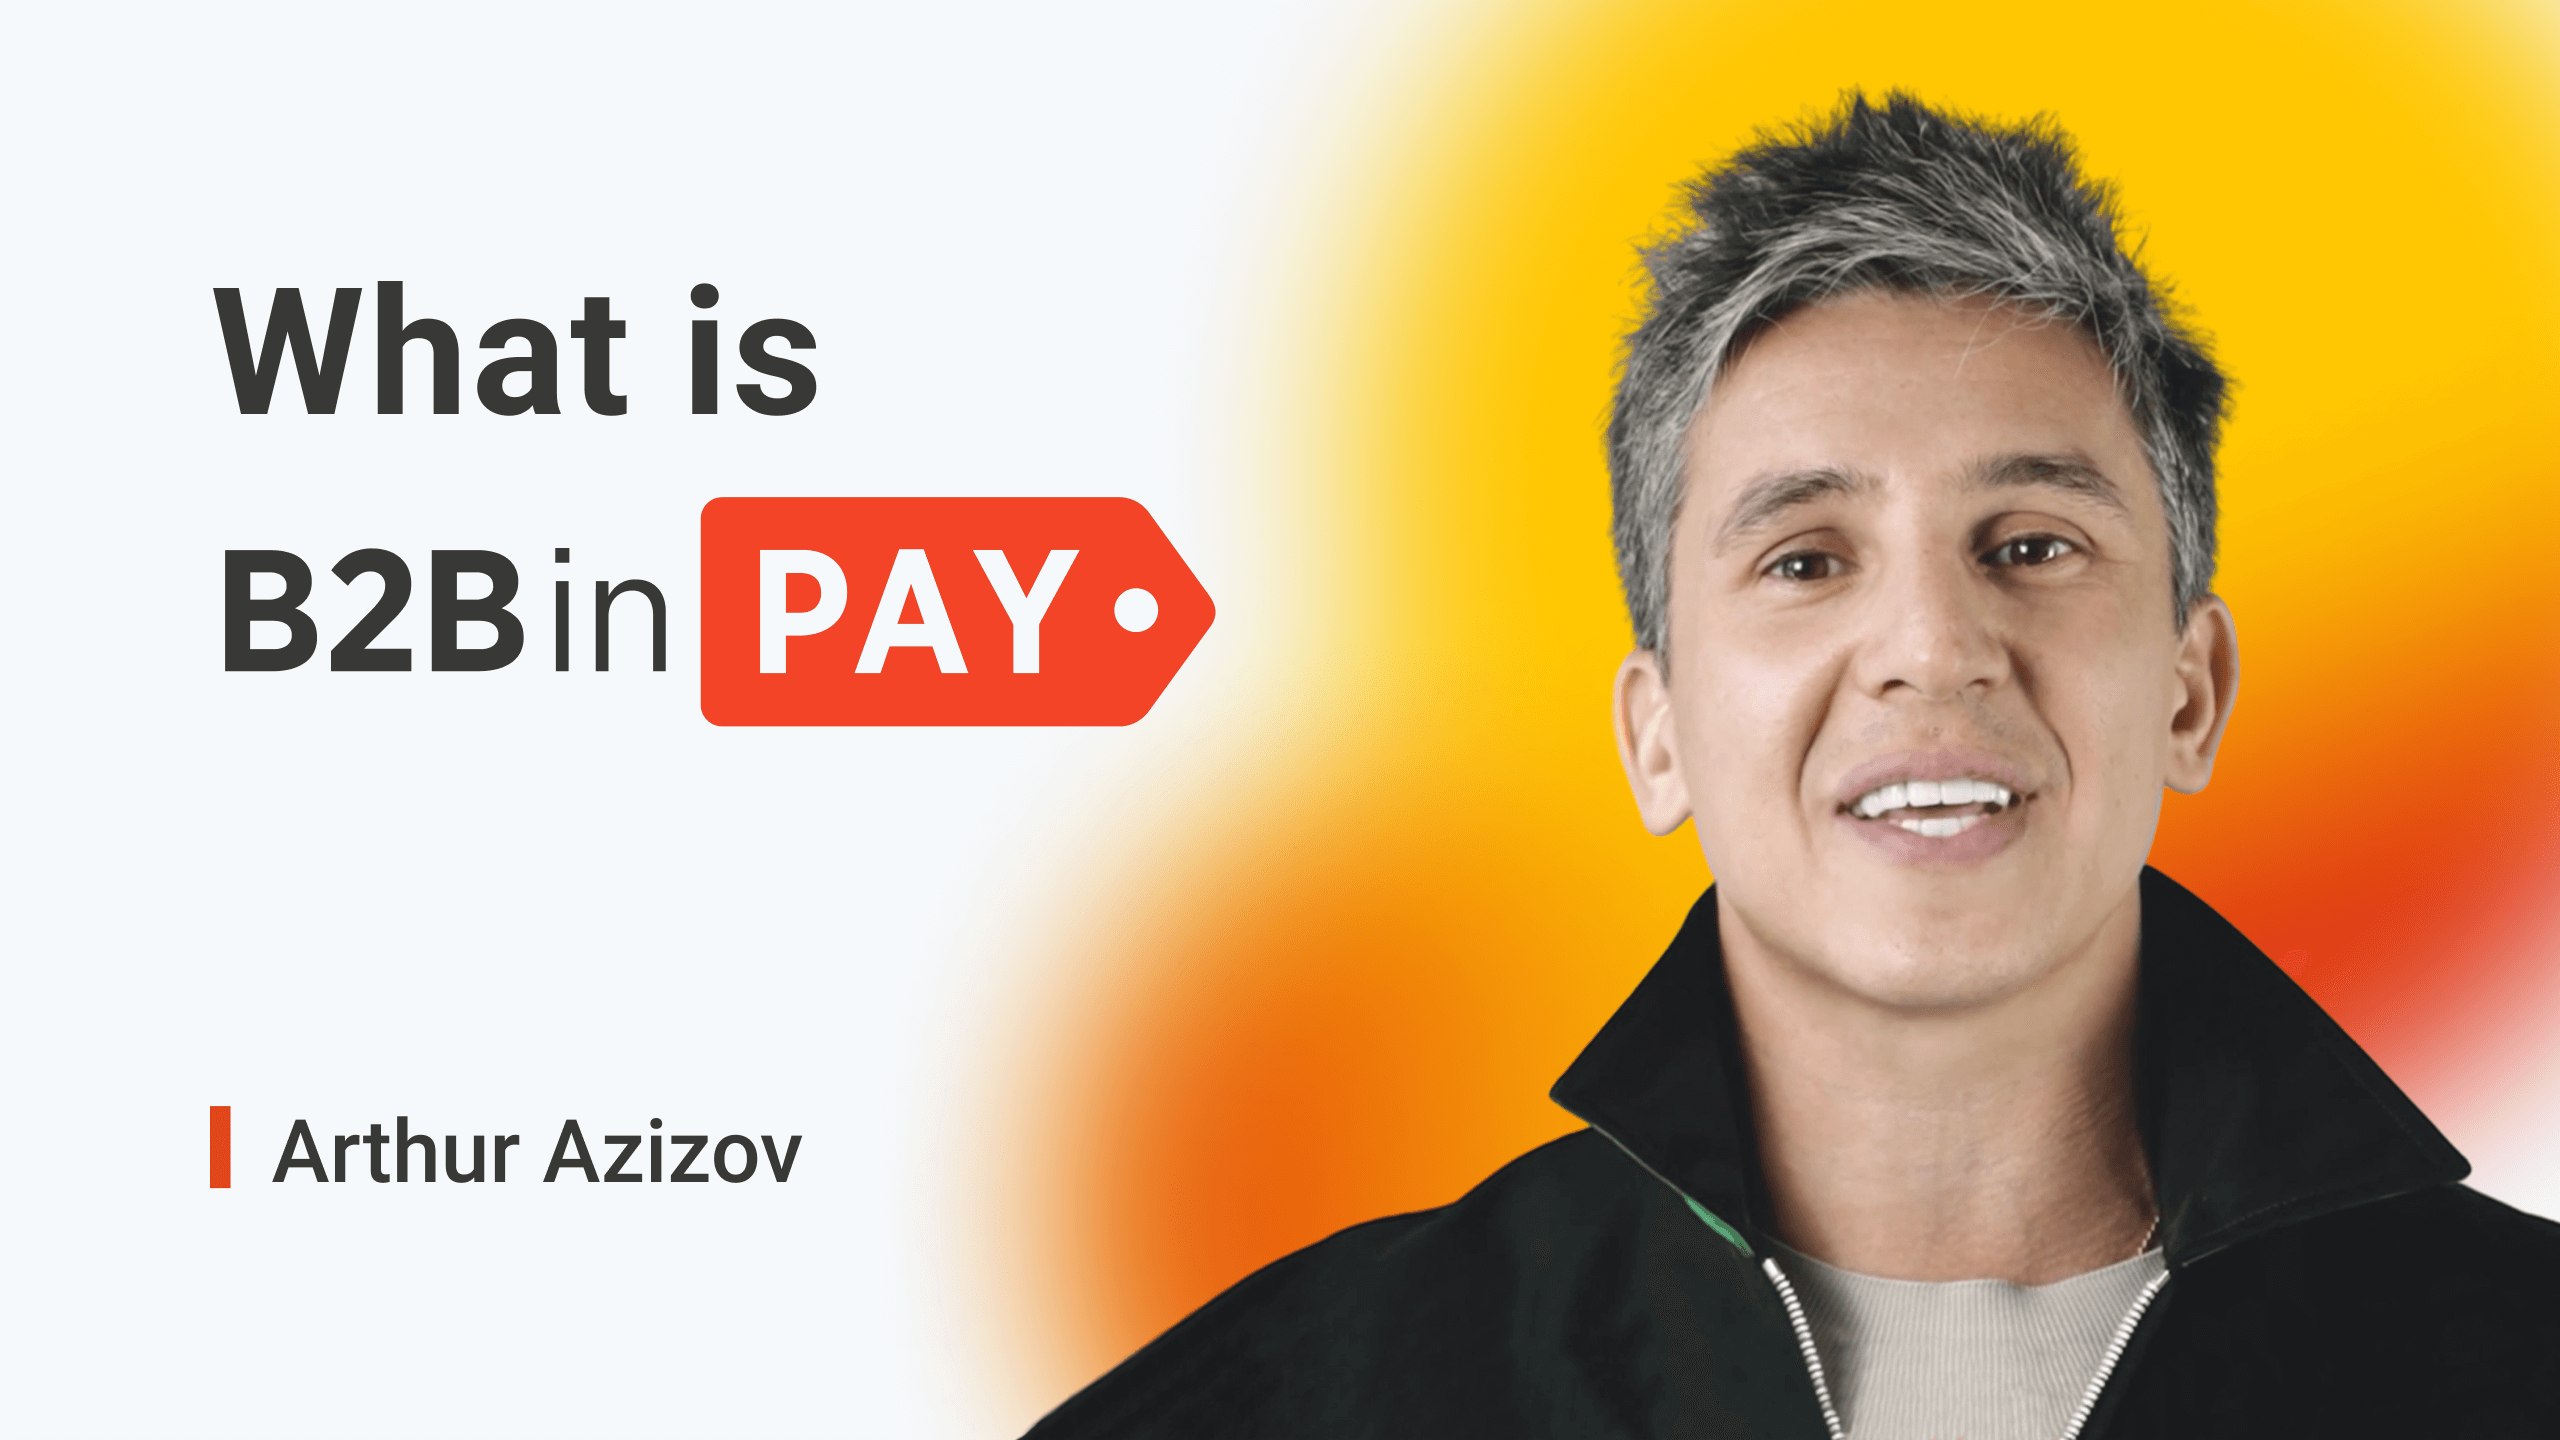 All you need to know about B2BinPay 2.0